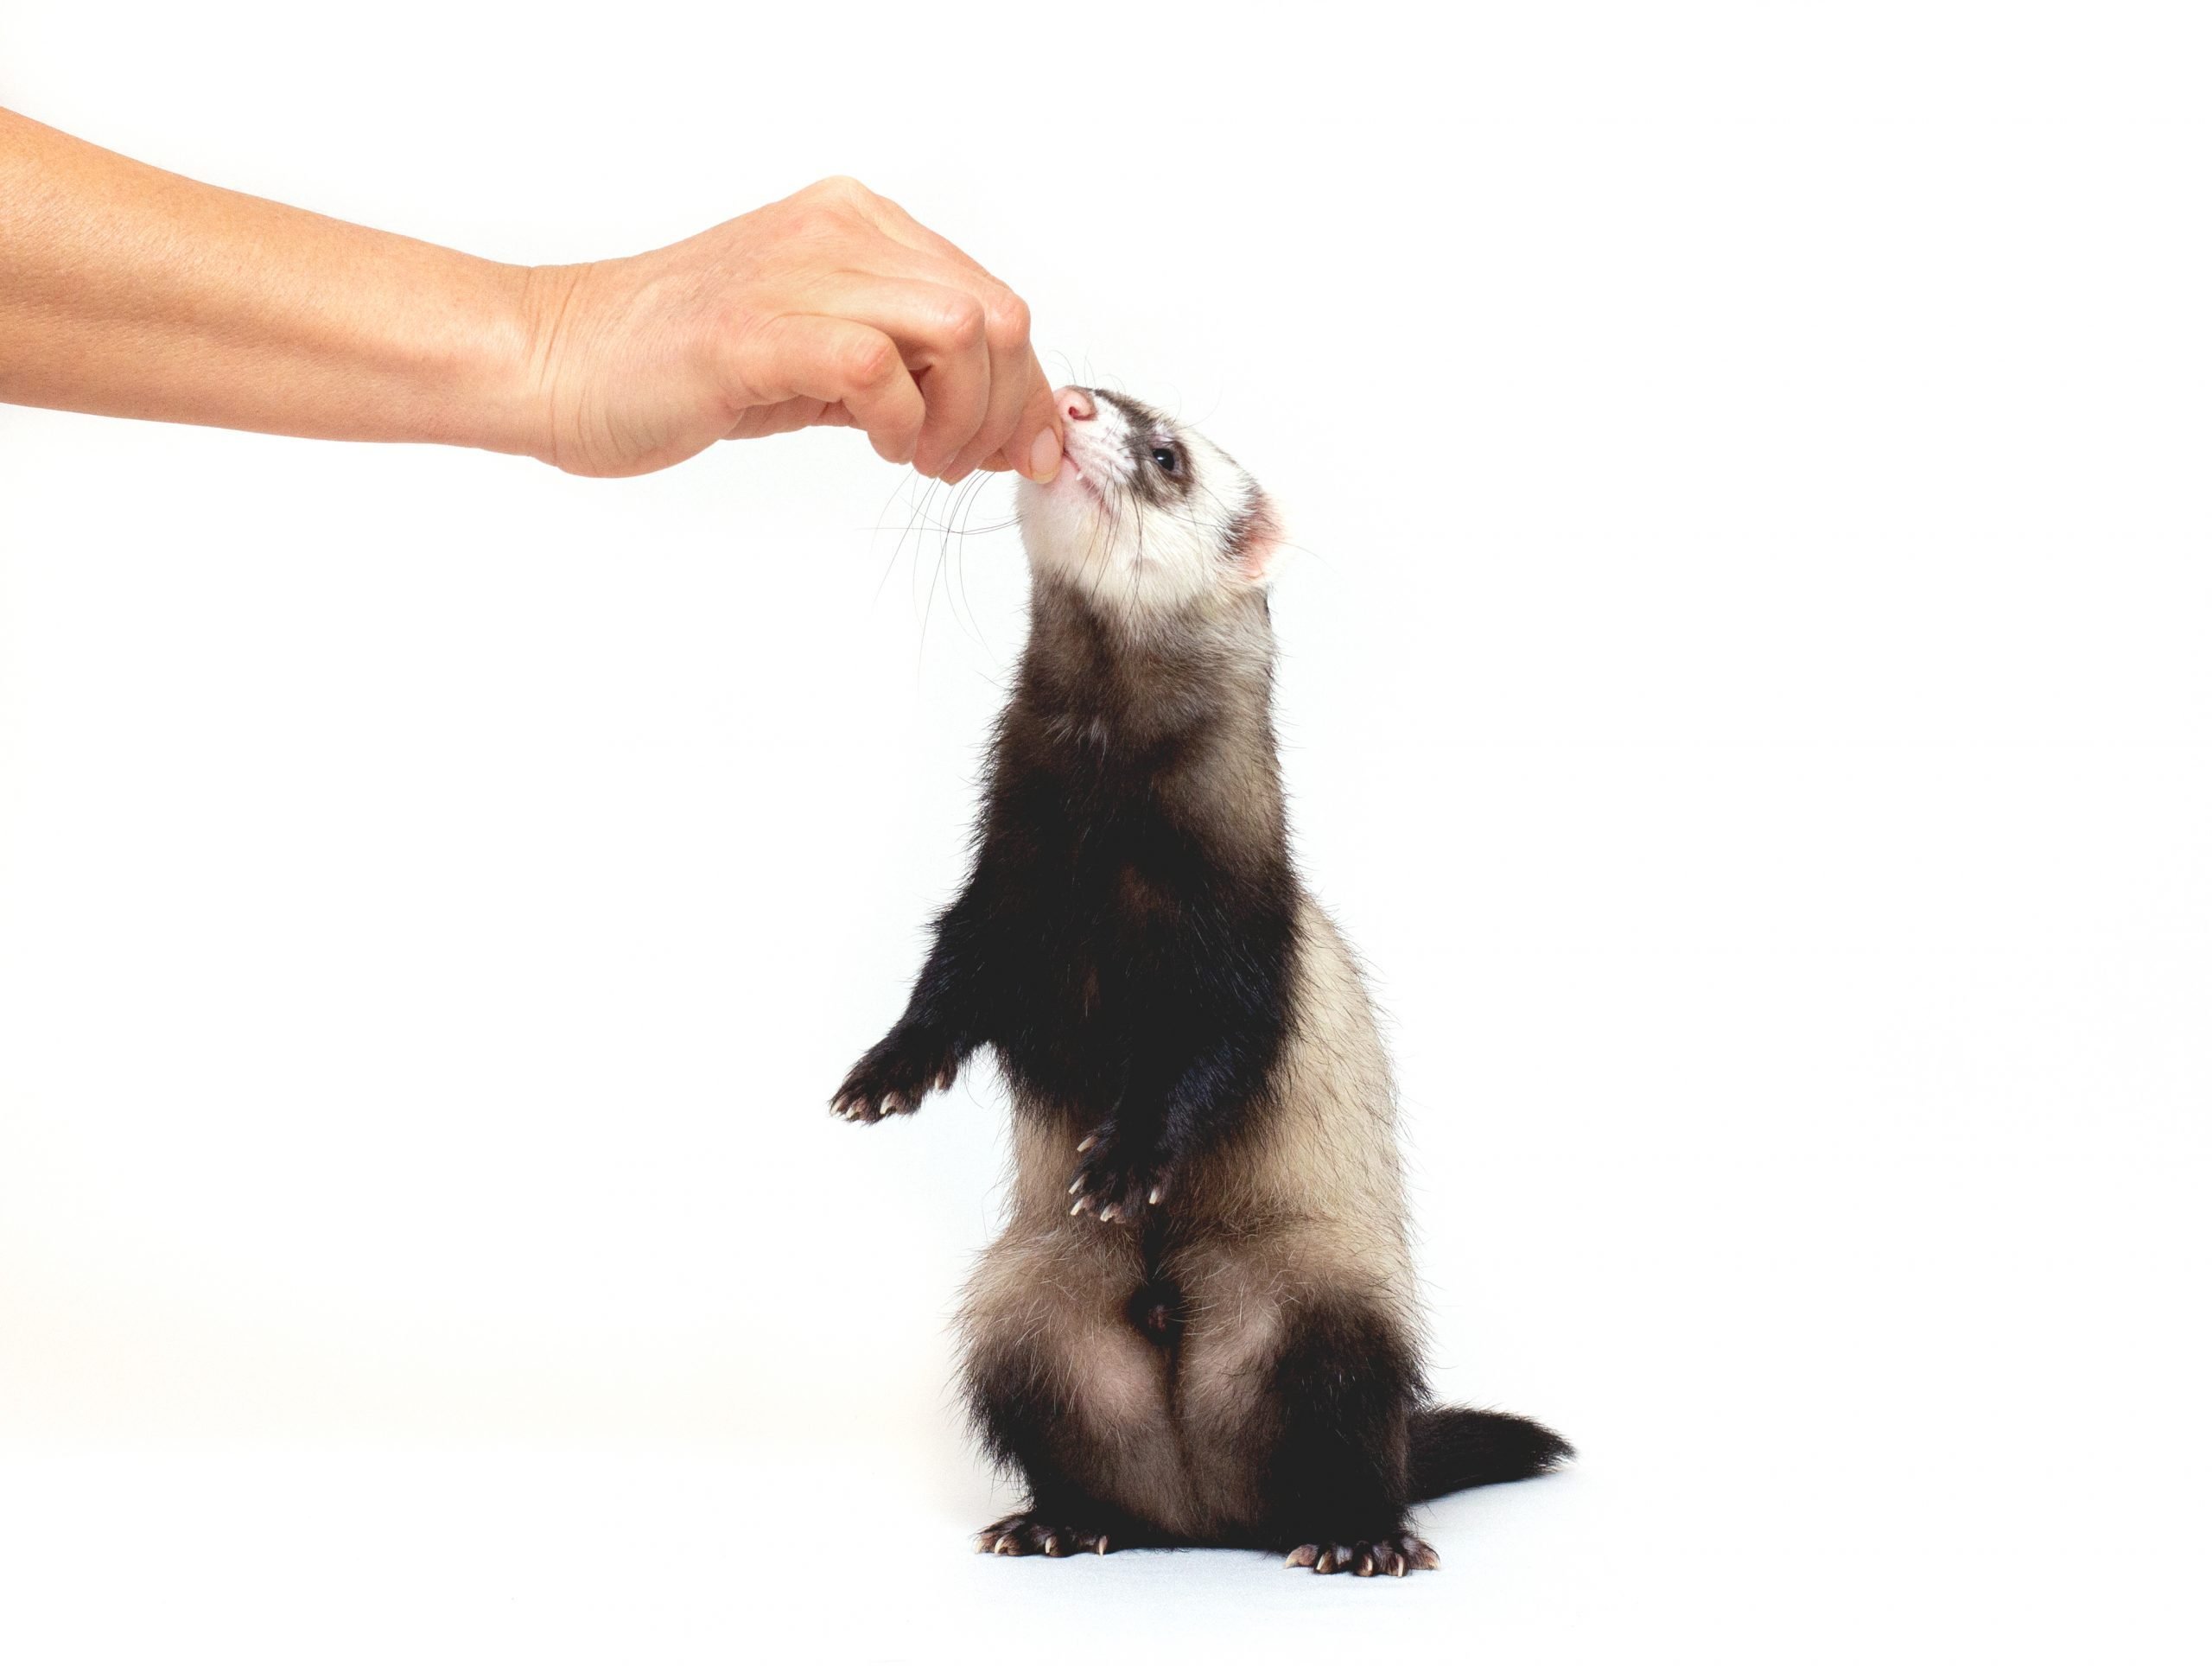 a male ferret feeding in a hand in front of white background